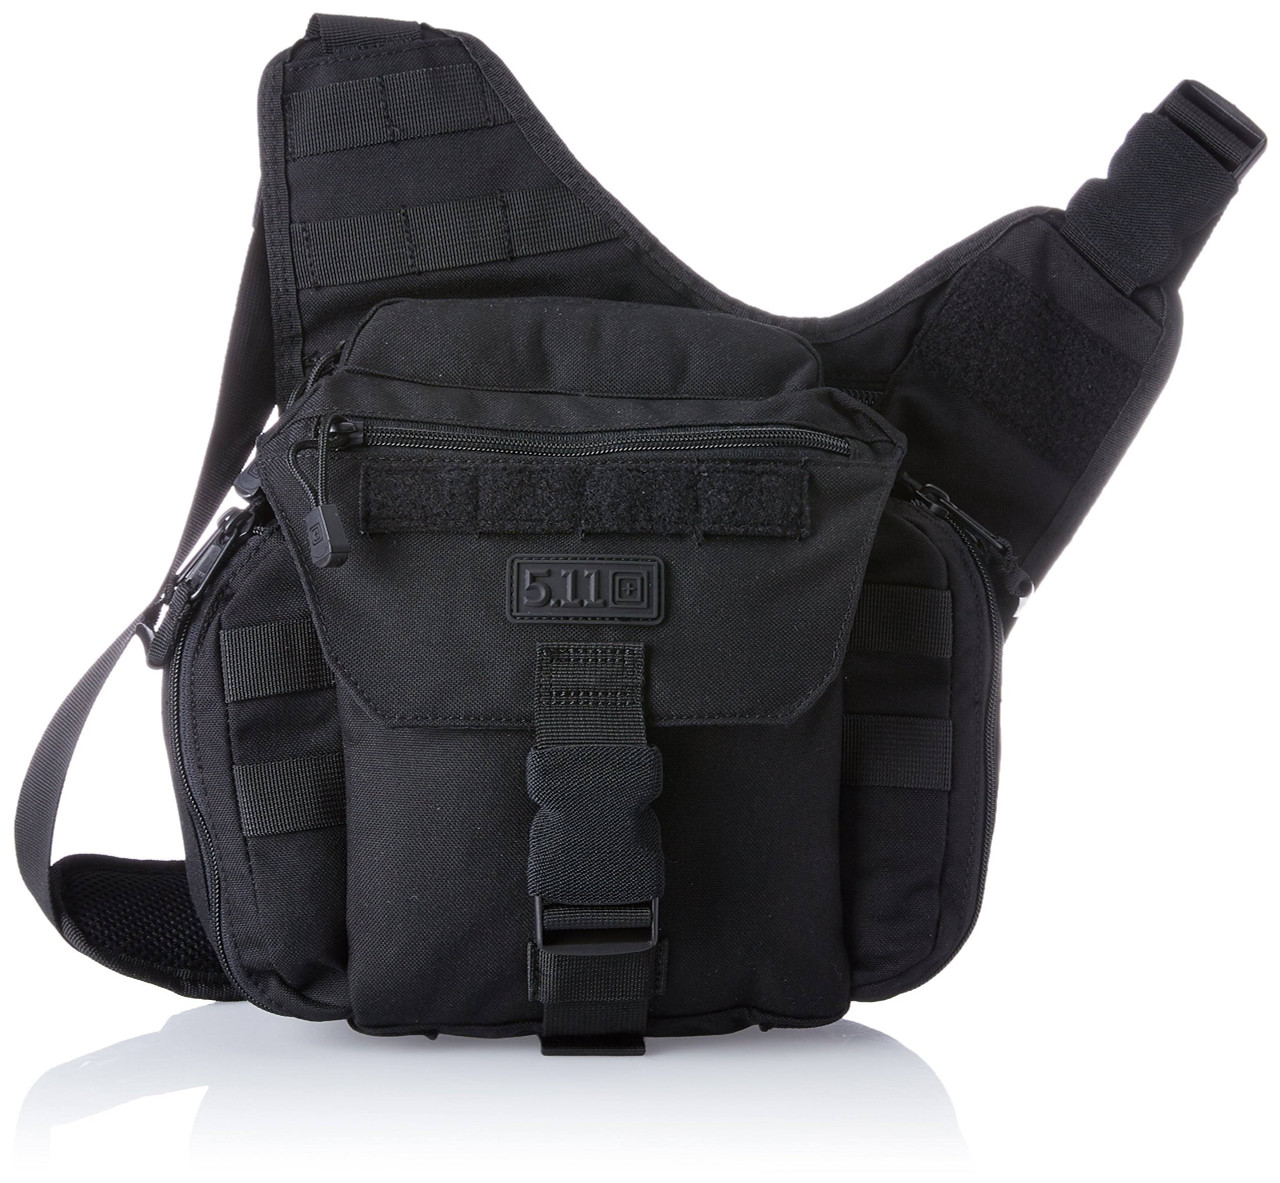 5.11 Tactical Daily Deploy Push Pack - Sandstone, FAST SHIP USA